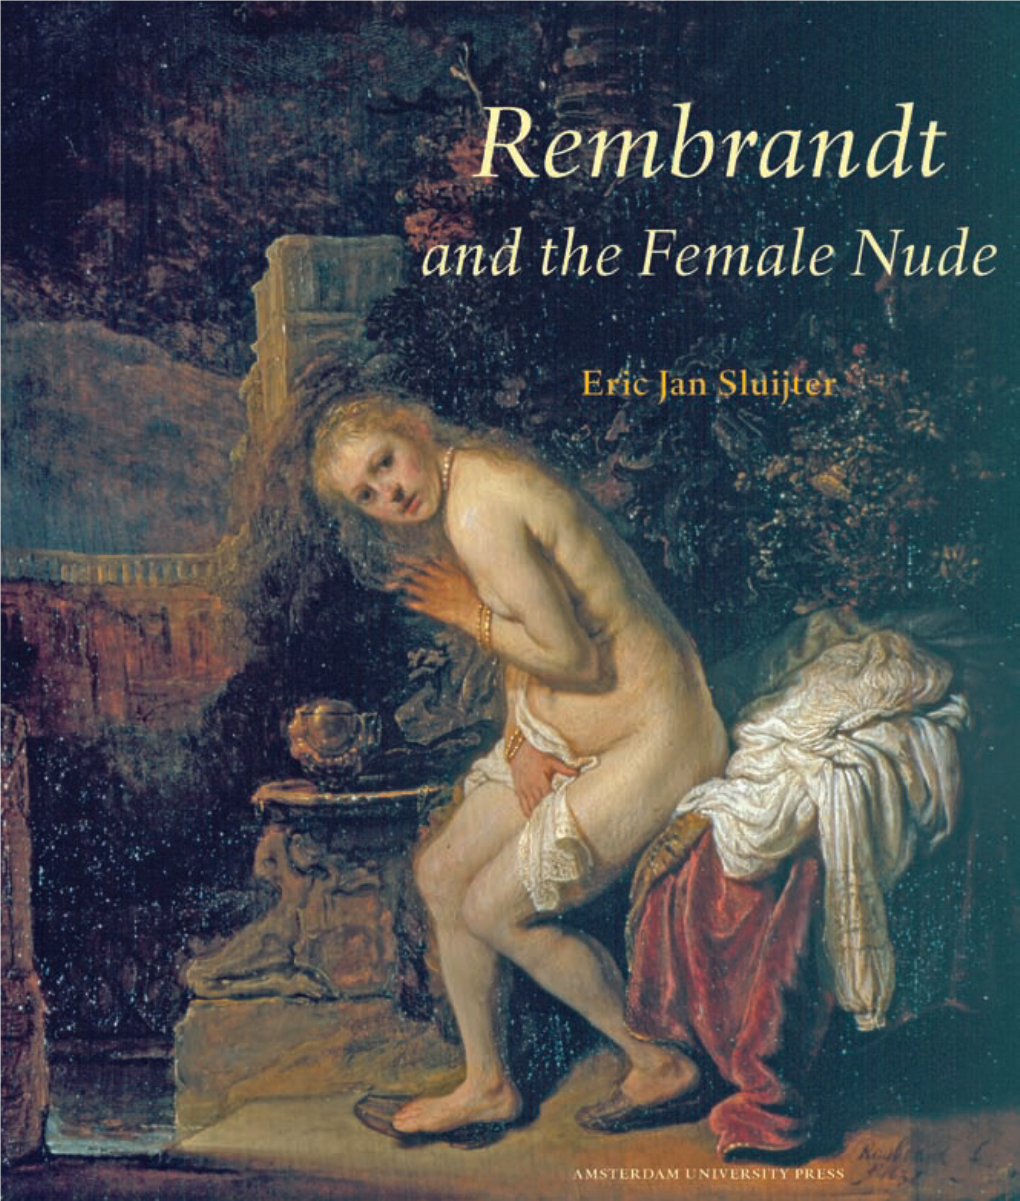 Rembrandt and the Female Nude AUP SLUIJTER.REMBRANDT 24X26,5 V20 27-08-2006 17:01 Pagina 2 AUP SLUIJTER.REMBRANDT 24X26,5 V20 27-08-2006 17:01 Pagina 3